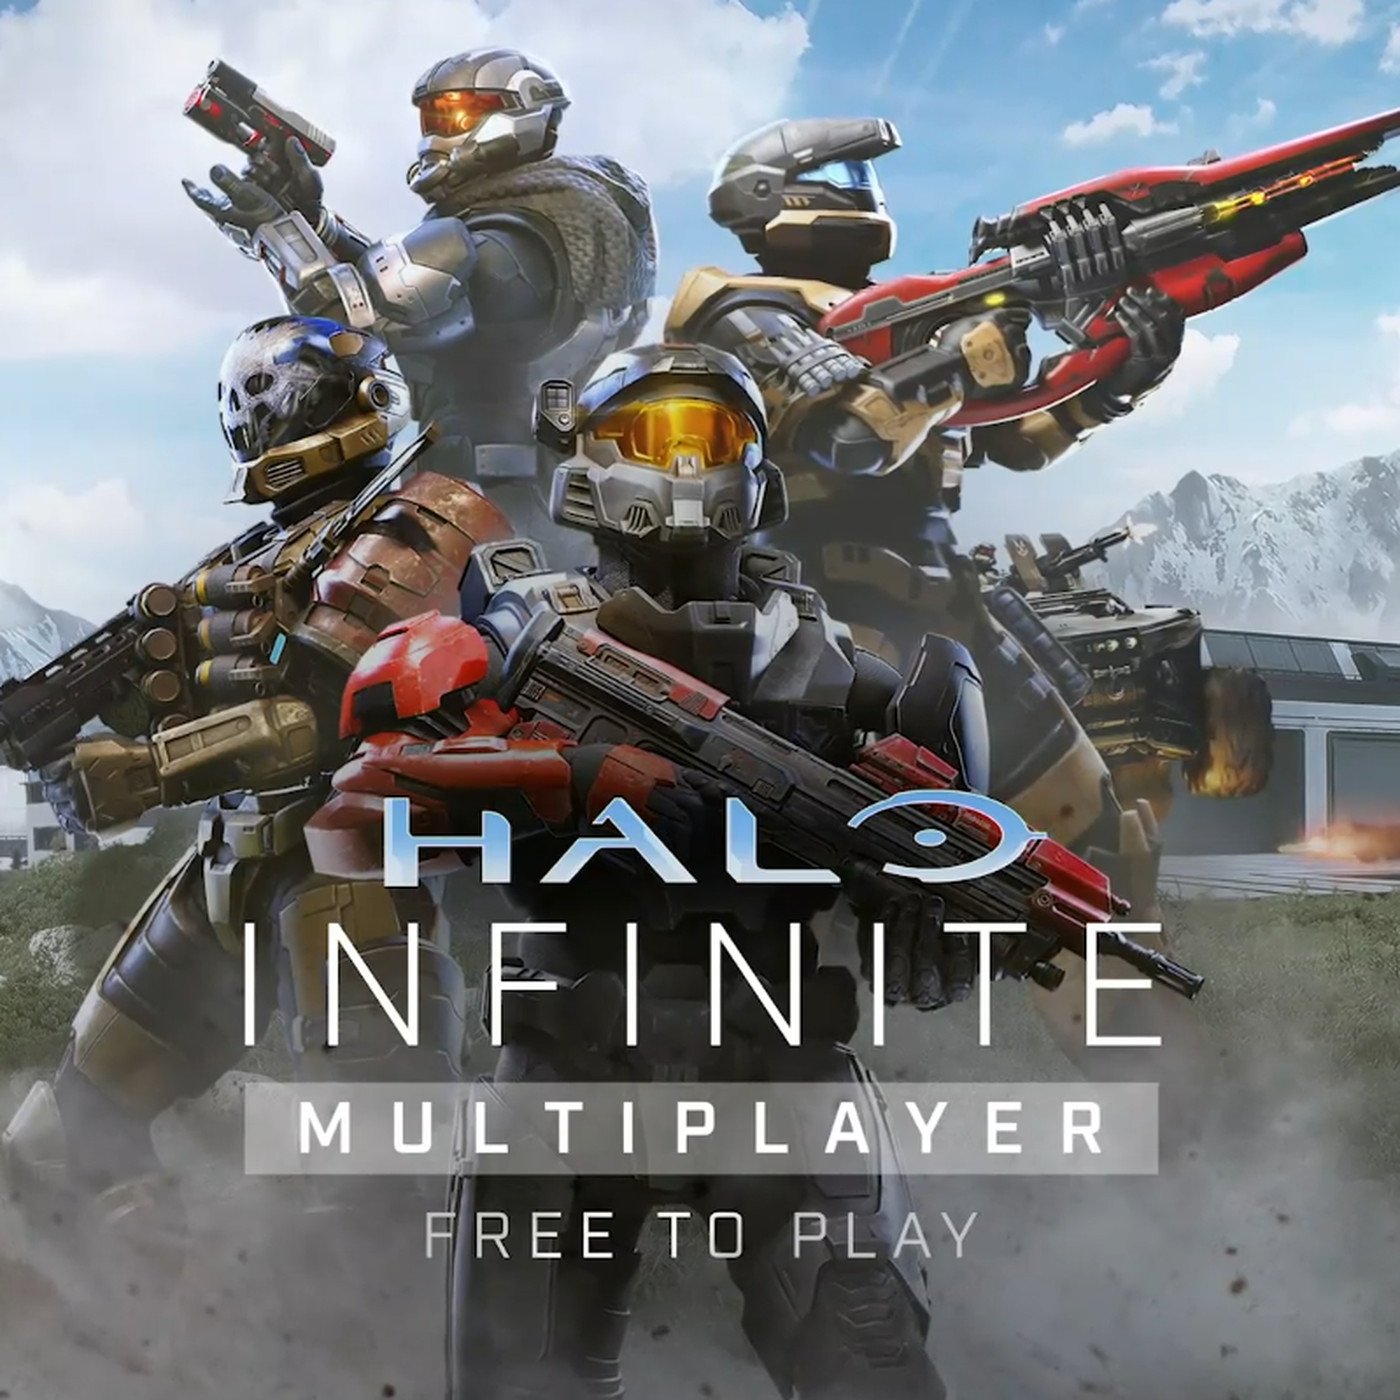 Halo Infinite Multiplayer Product